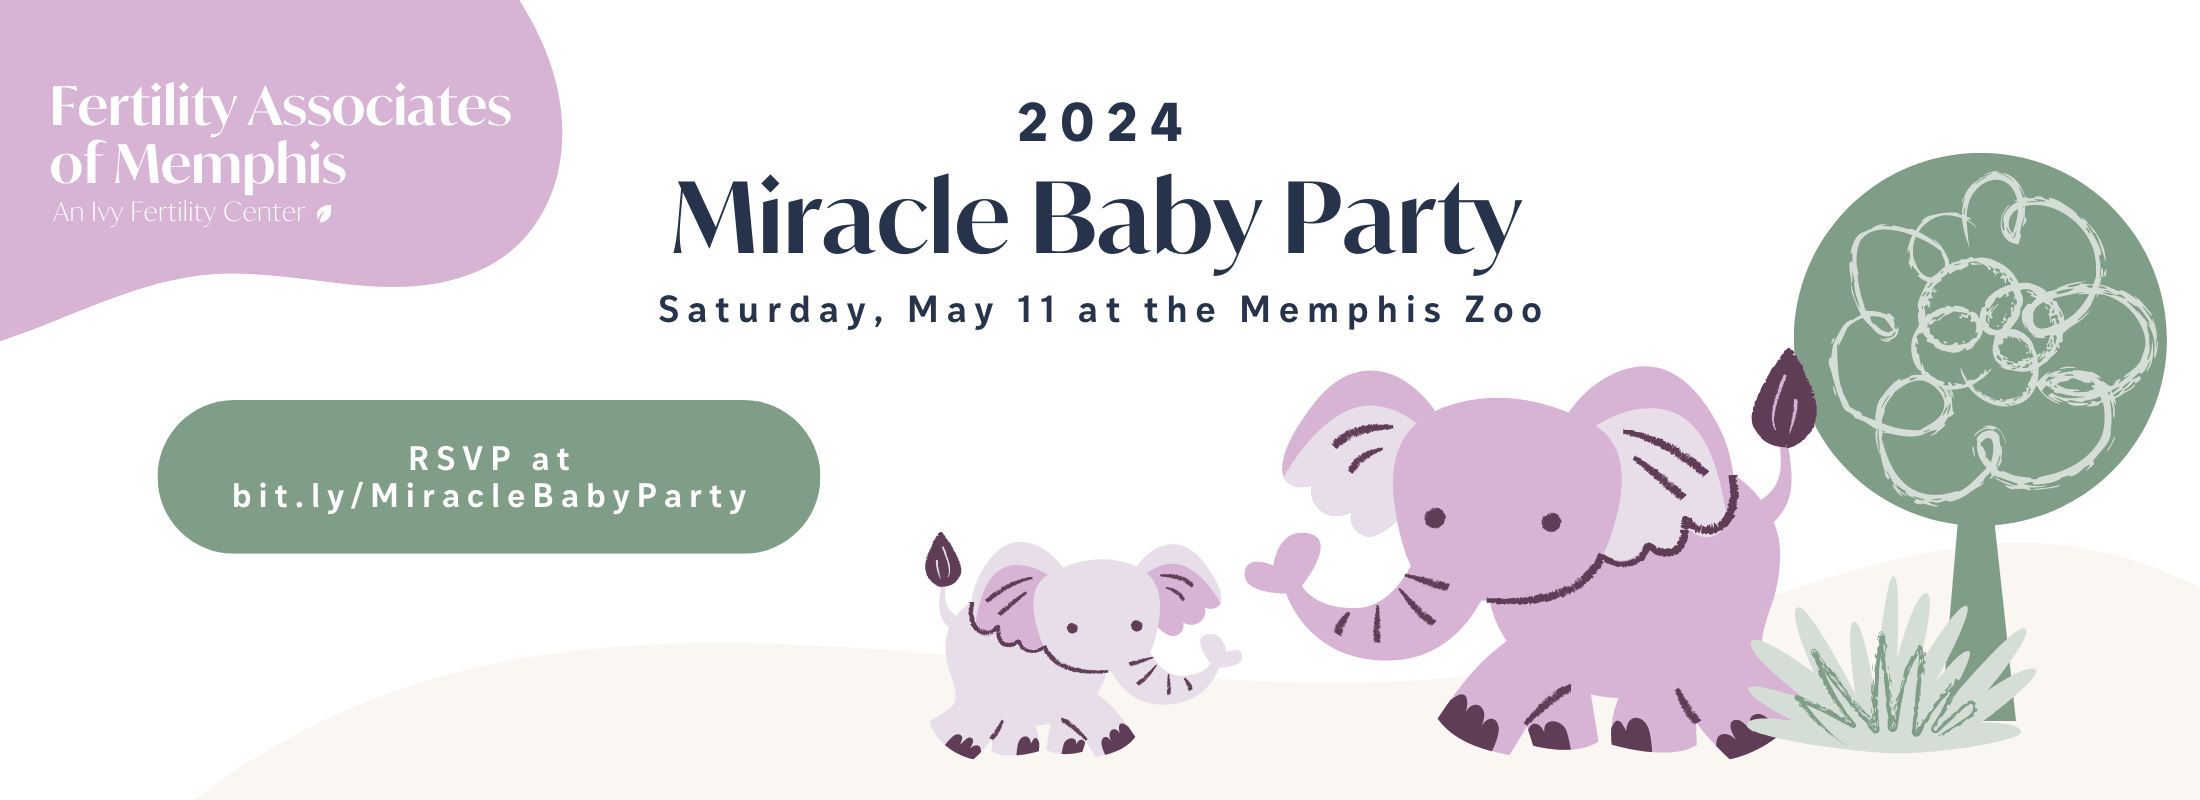 2024 Miracle Baby Party